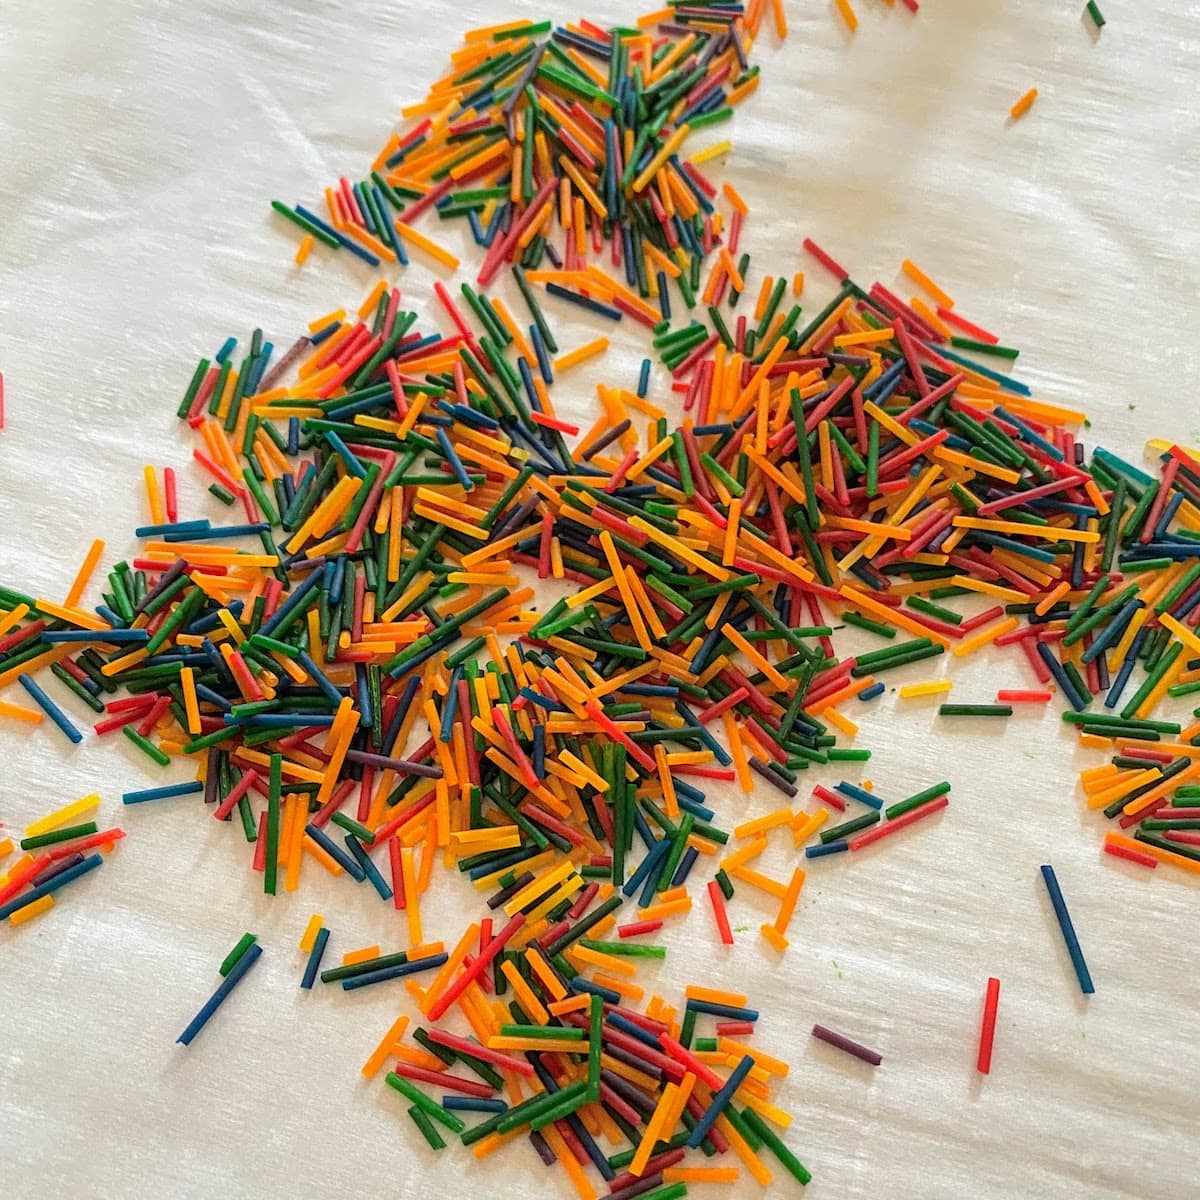 rainbow pasta pieces spread out